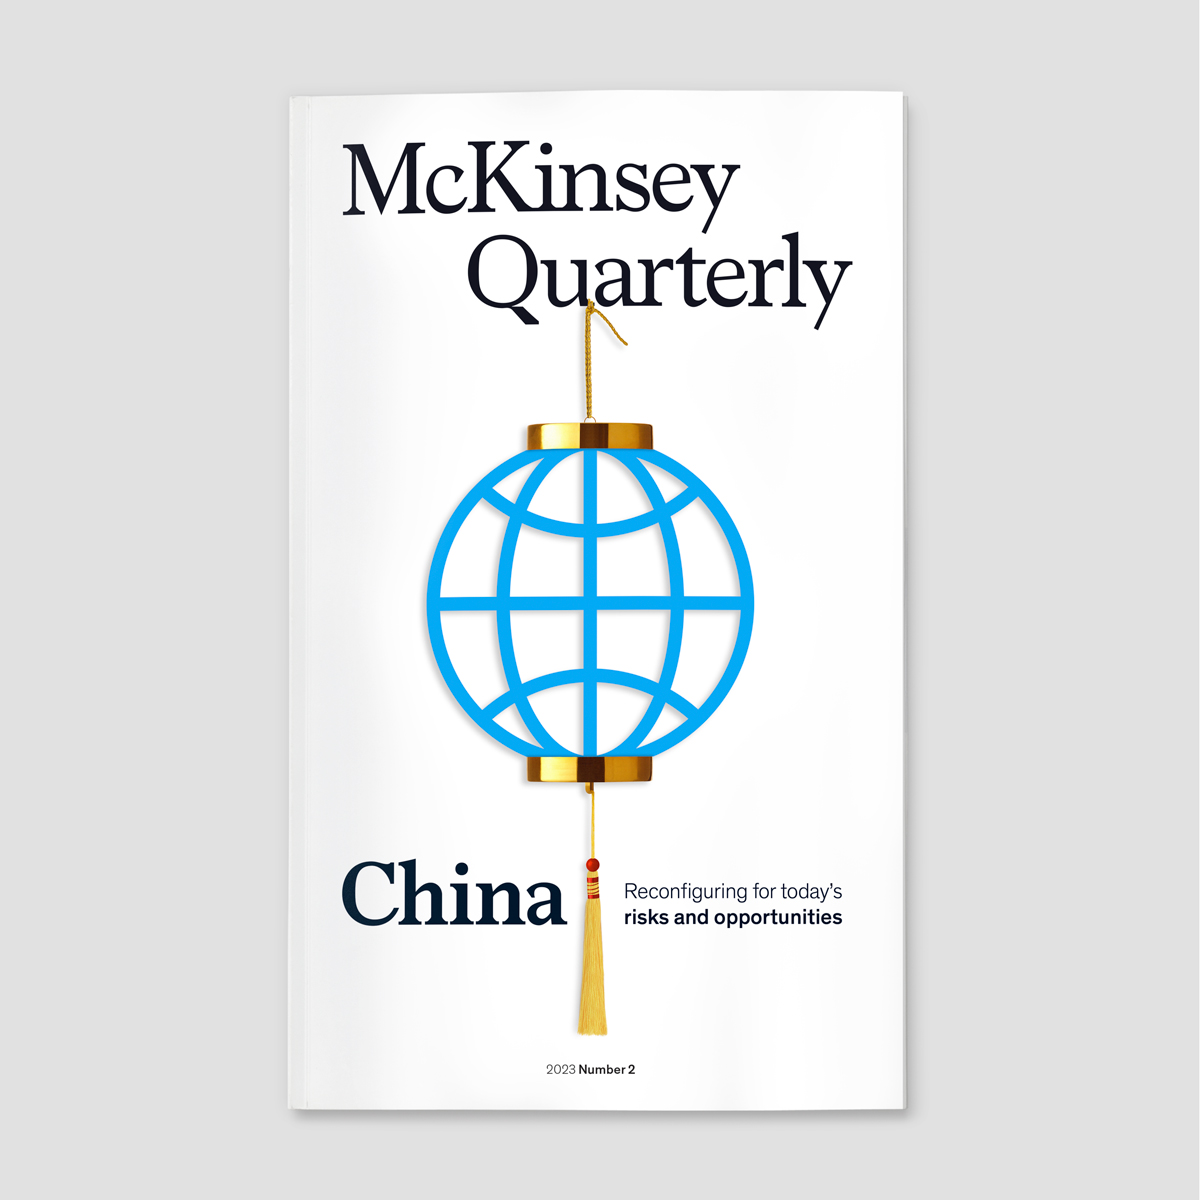 A cover by Mariaelena Caputi that illustrate the risks and opportunities of doing business in China.